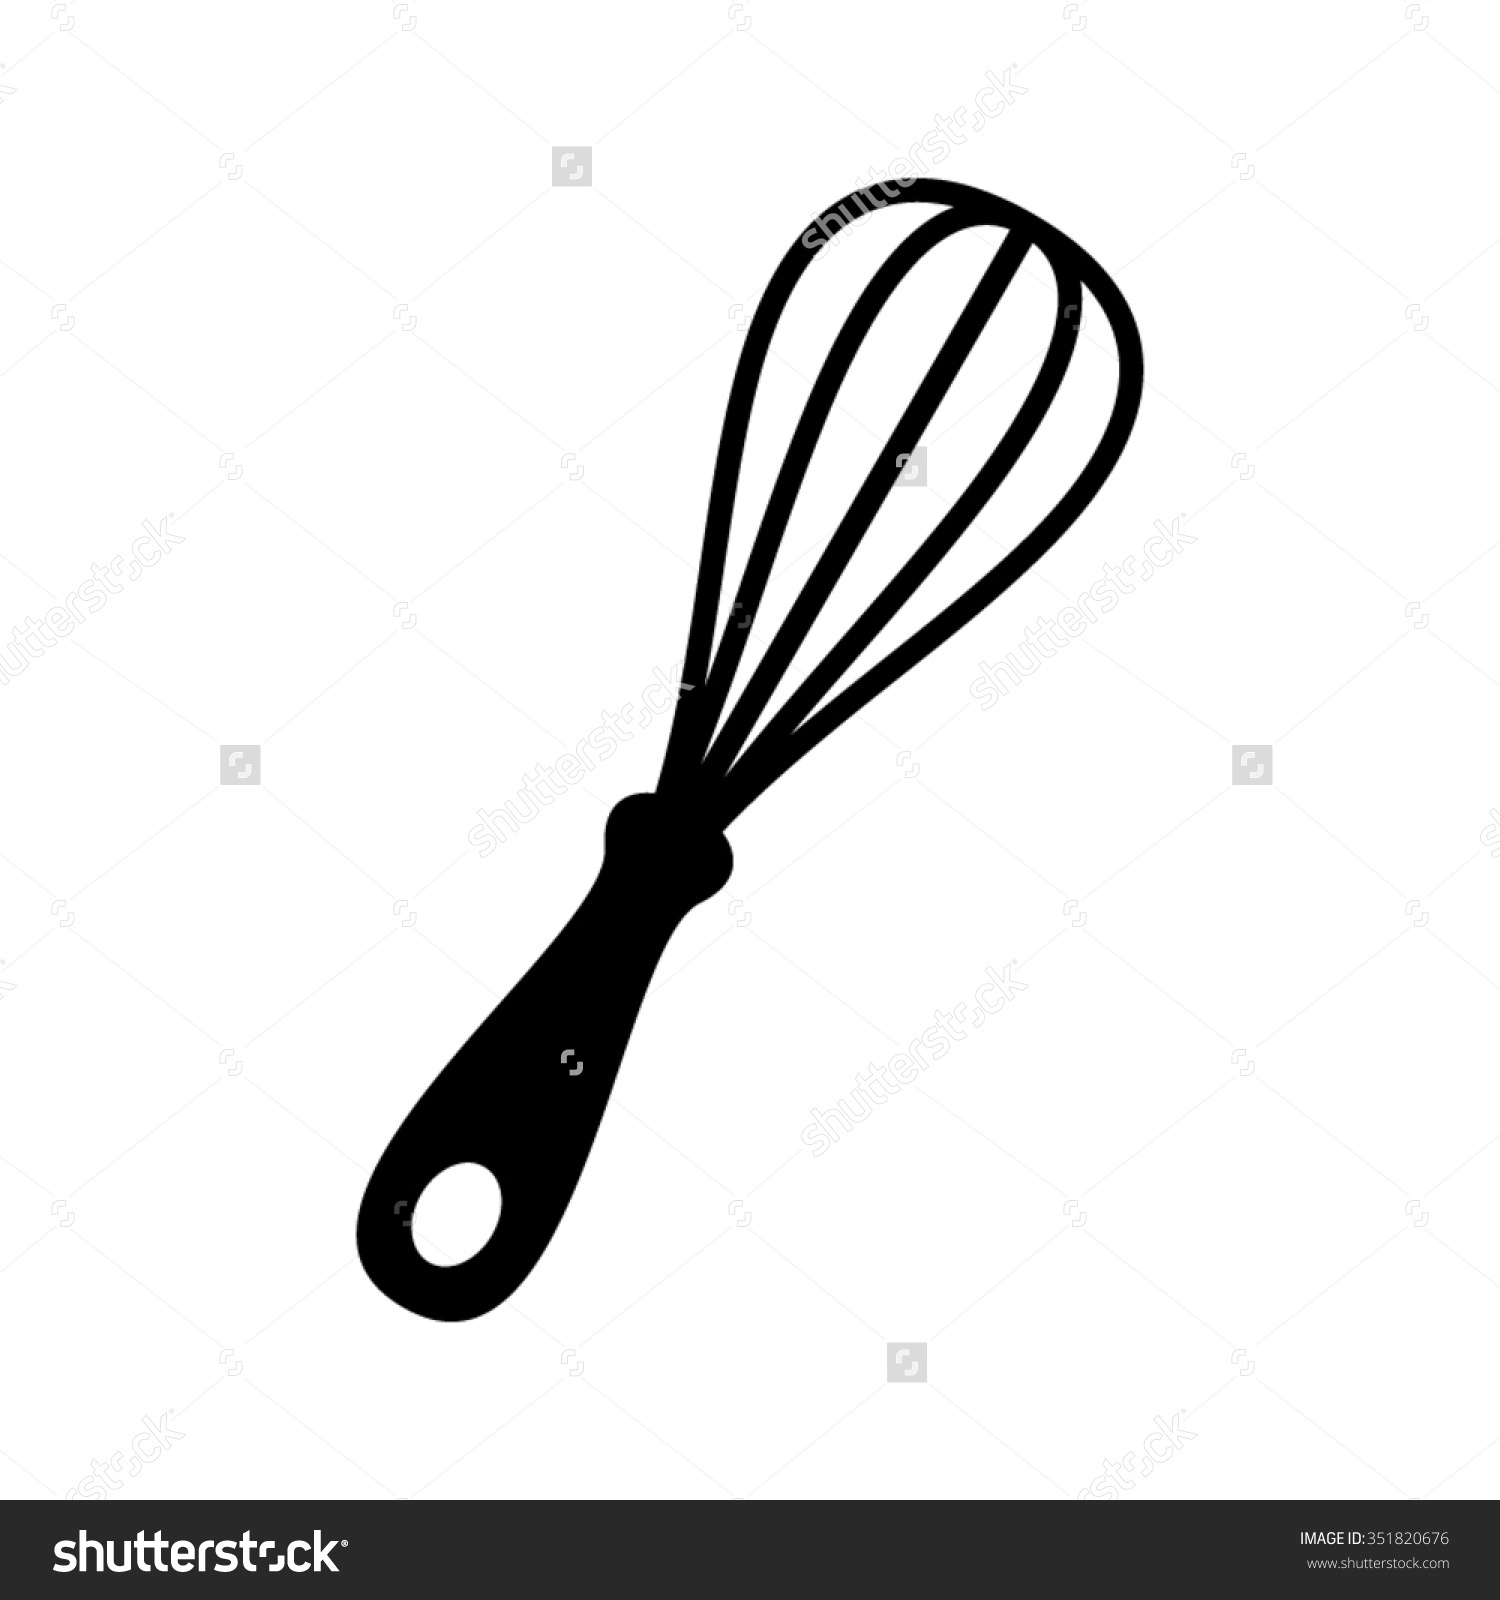 free download Whisk